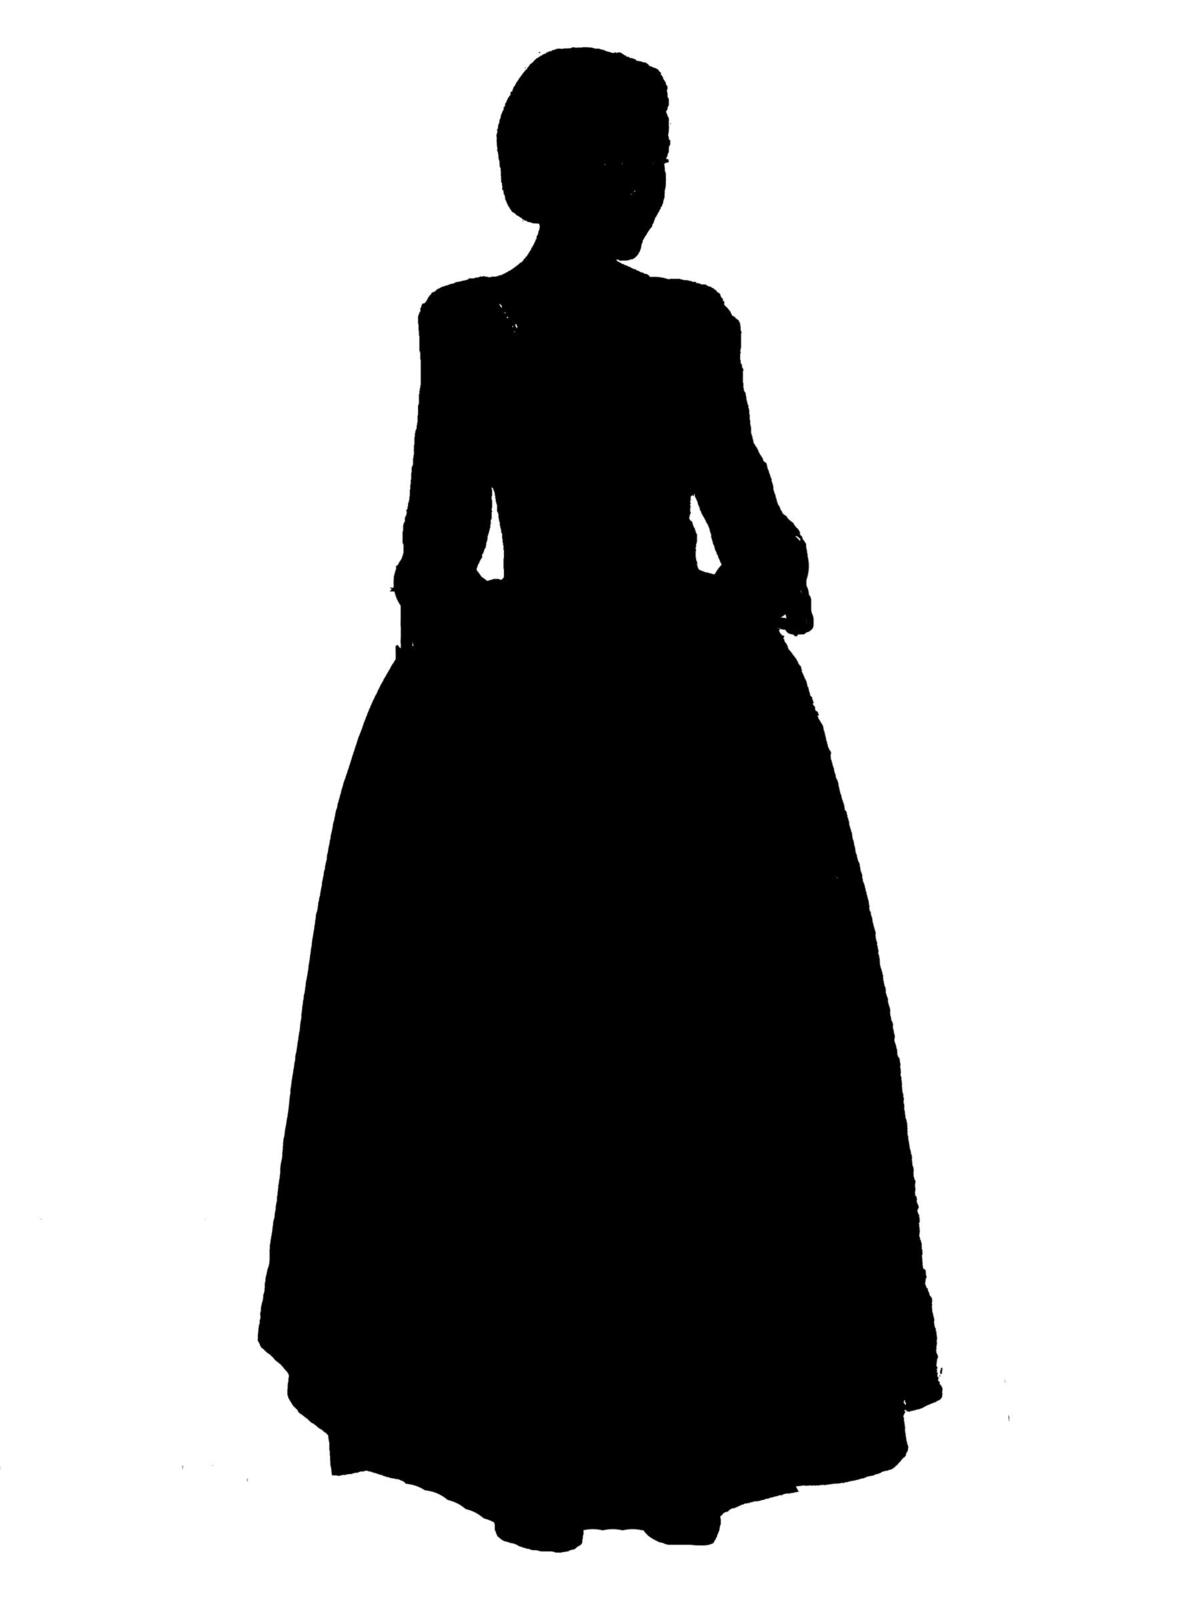 Silhouette of a woman in 18th-century clothing.